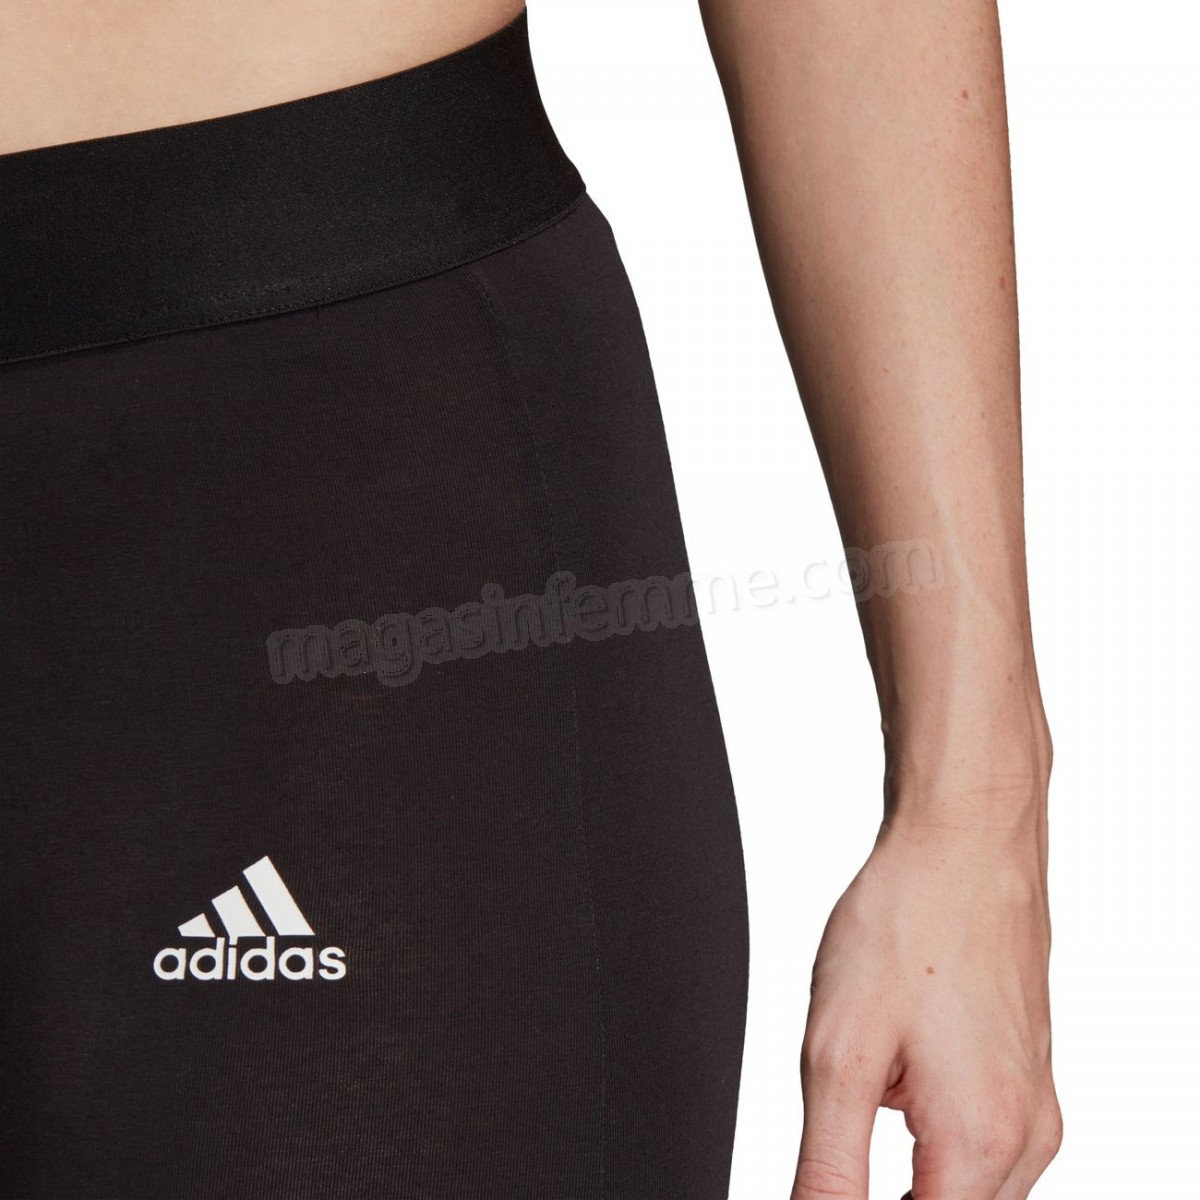 Adidas-Fitness femme ADIDAS Collant femme adidas Must Haves 3-Stripes en solde - -15